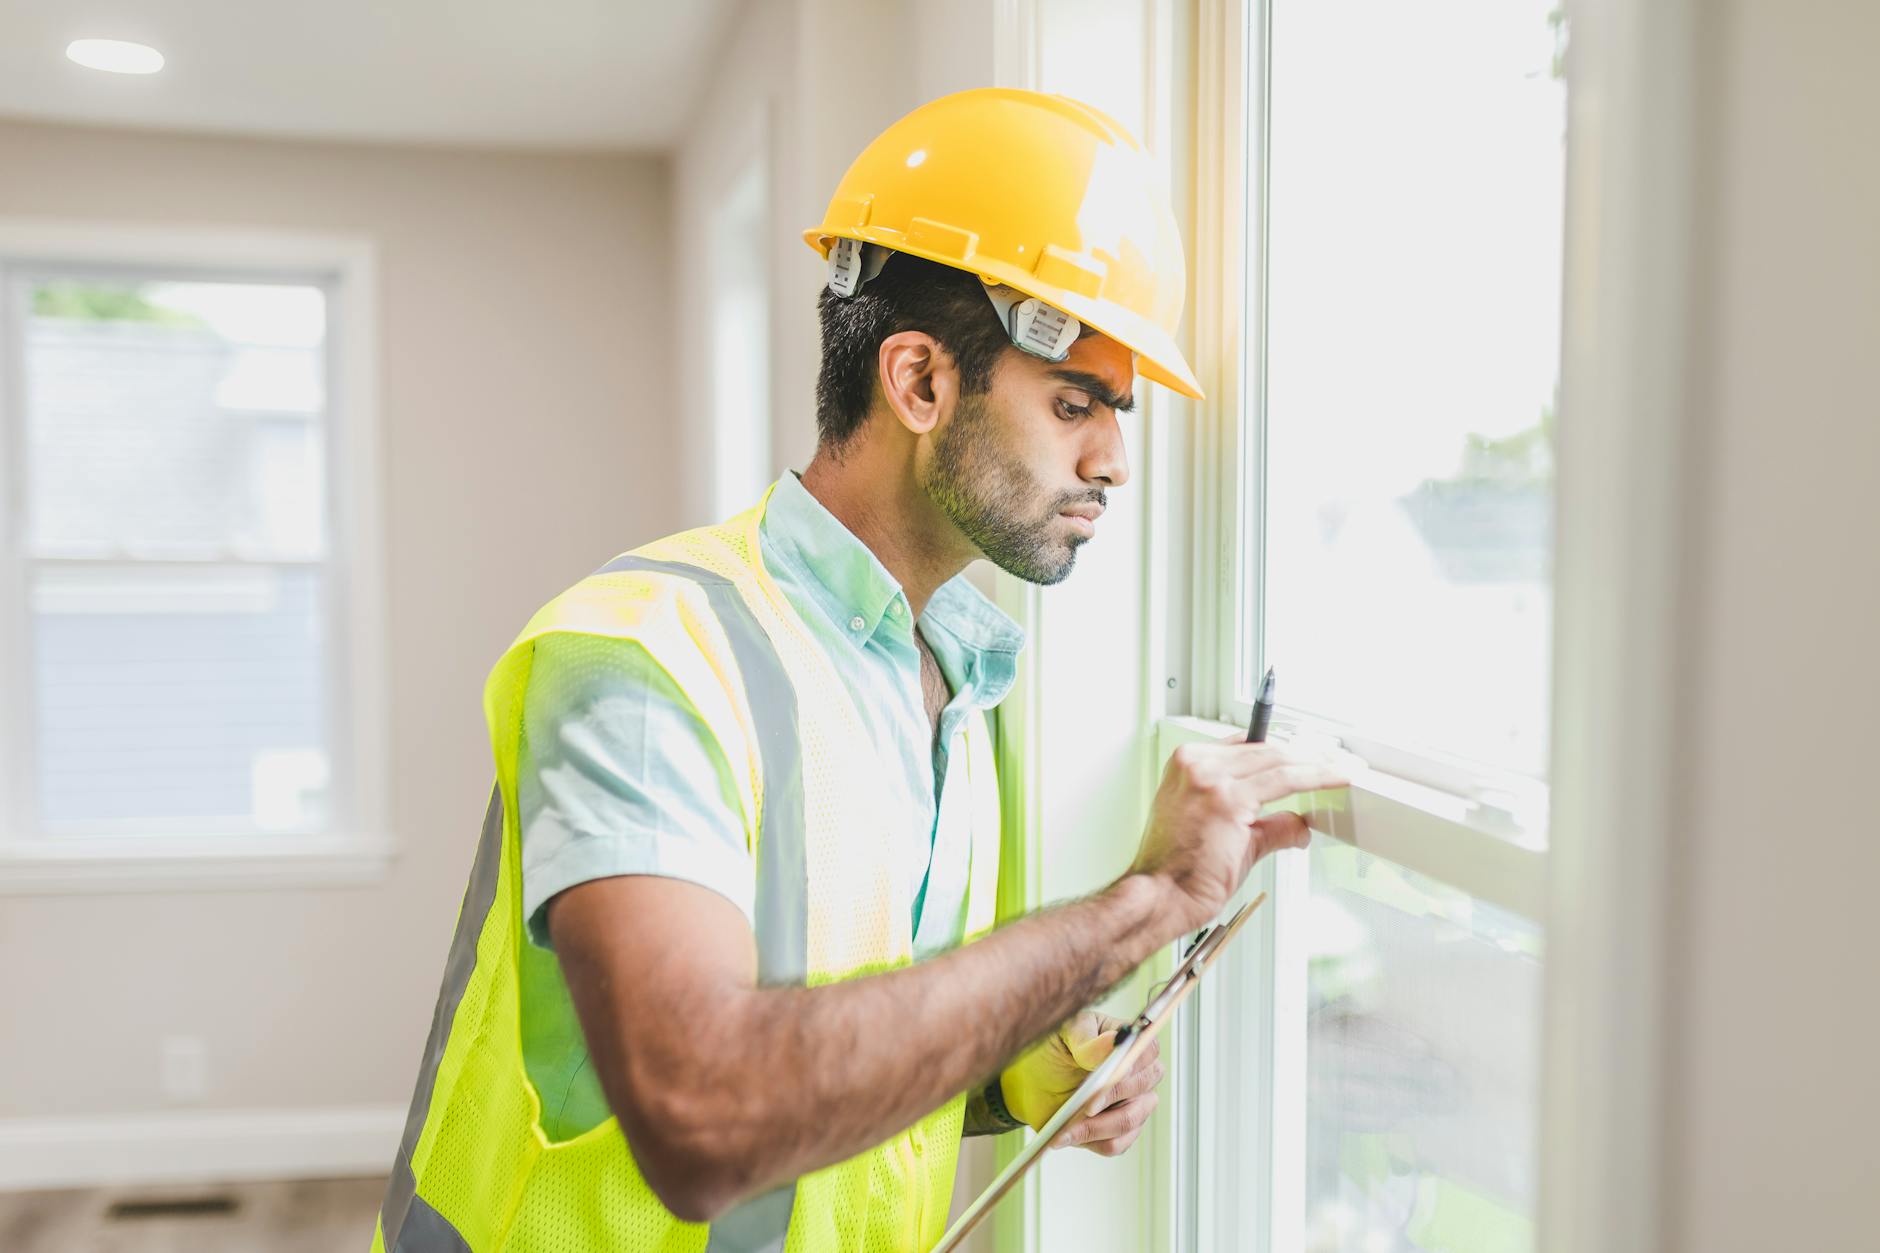 Construction Worker in Yellow Safety Vest and Helmet Checking Glass Window of a House